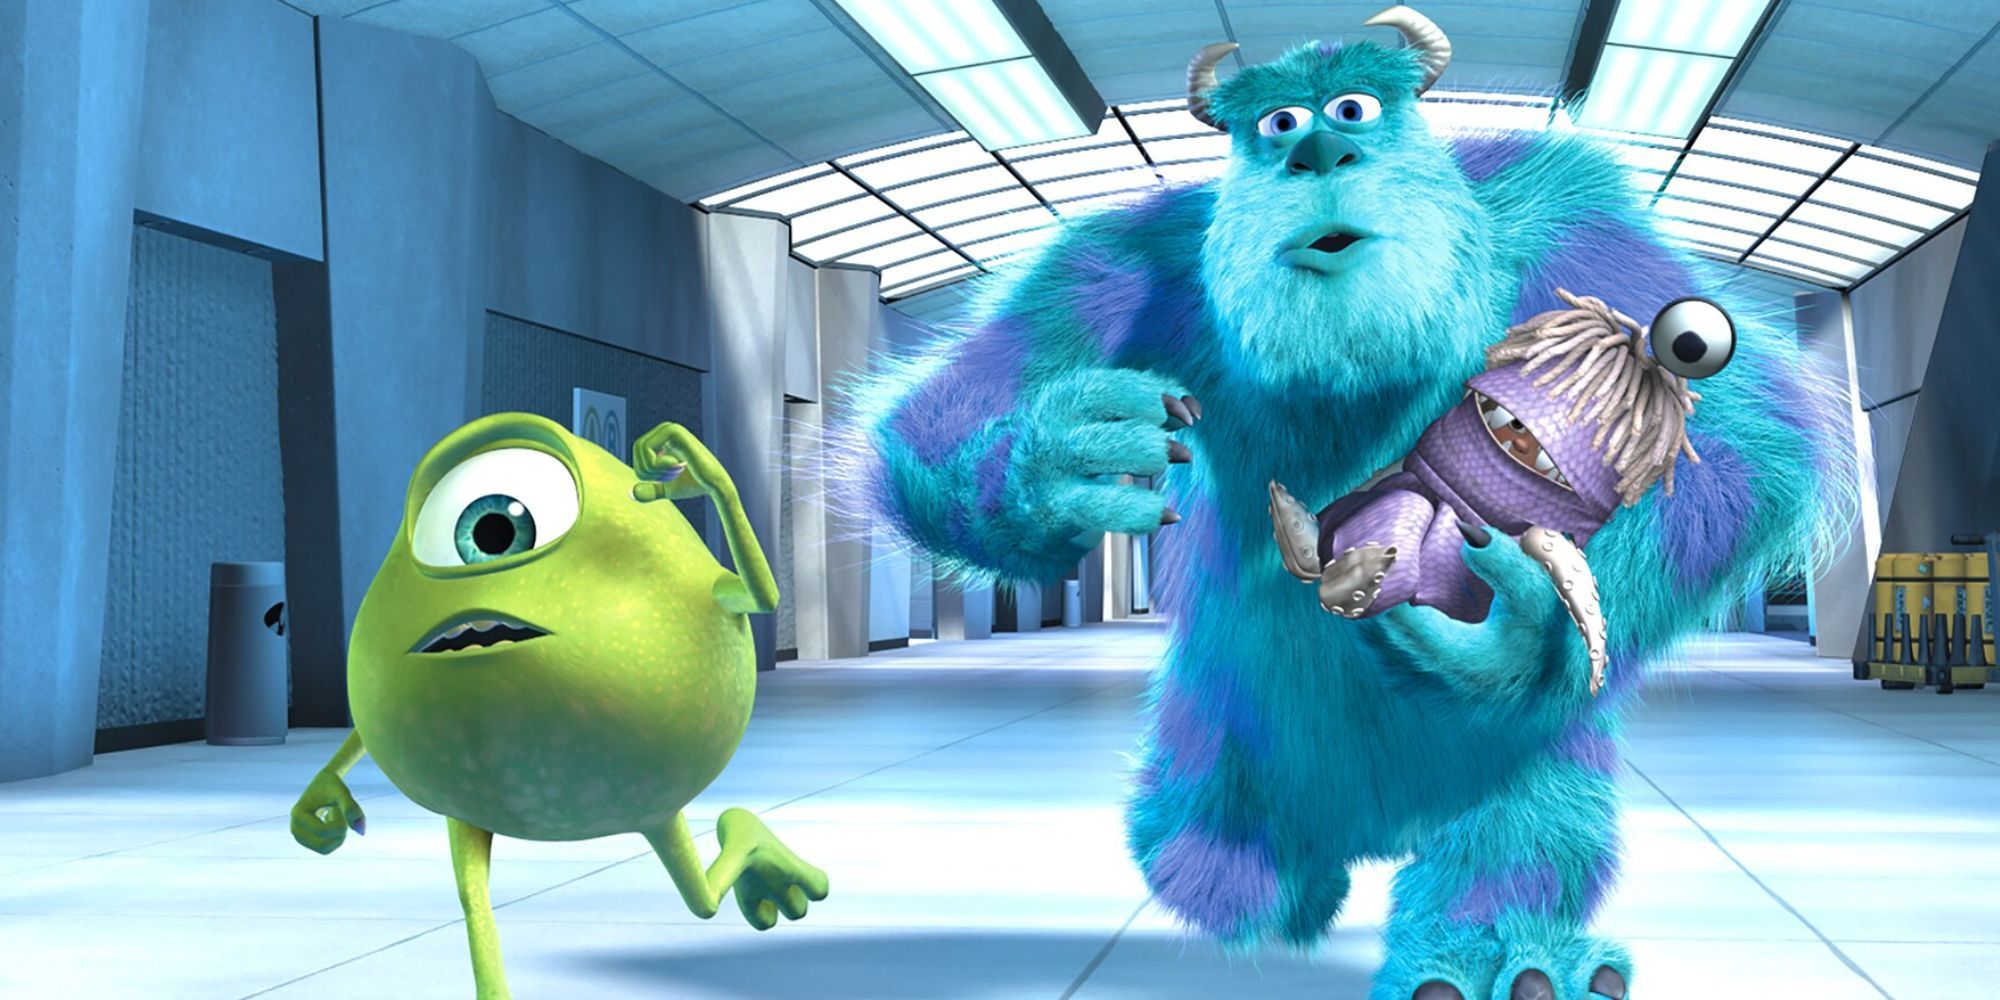 Mike (Billy Crystal) and Sulley (John Goodman) running down a hallway in Monsters Inc. (2001)